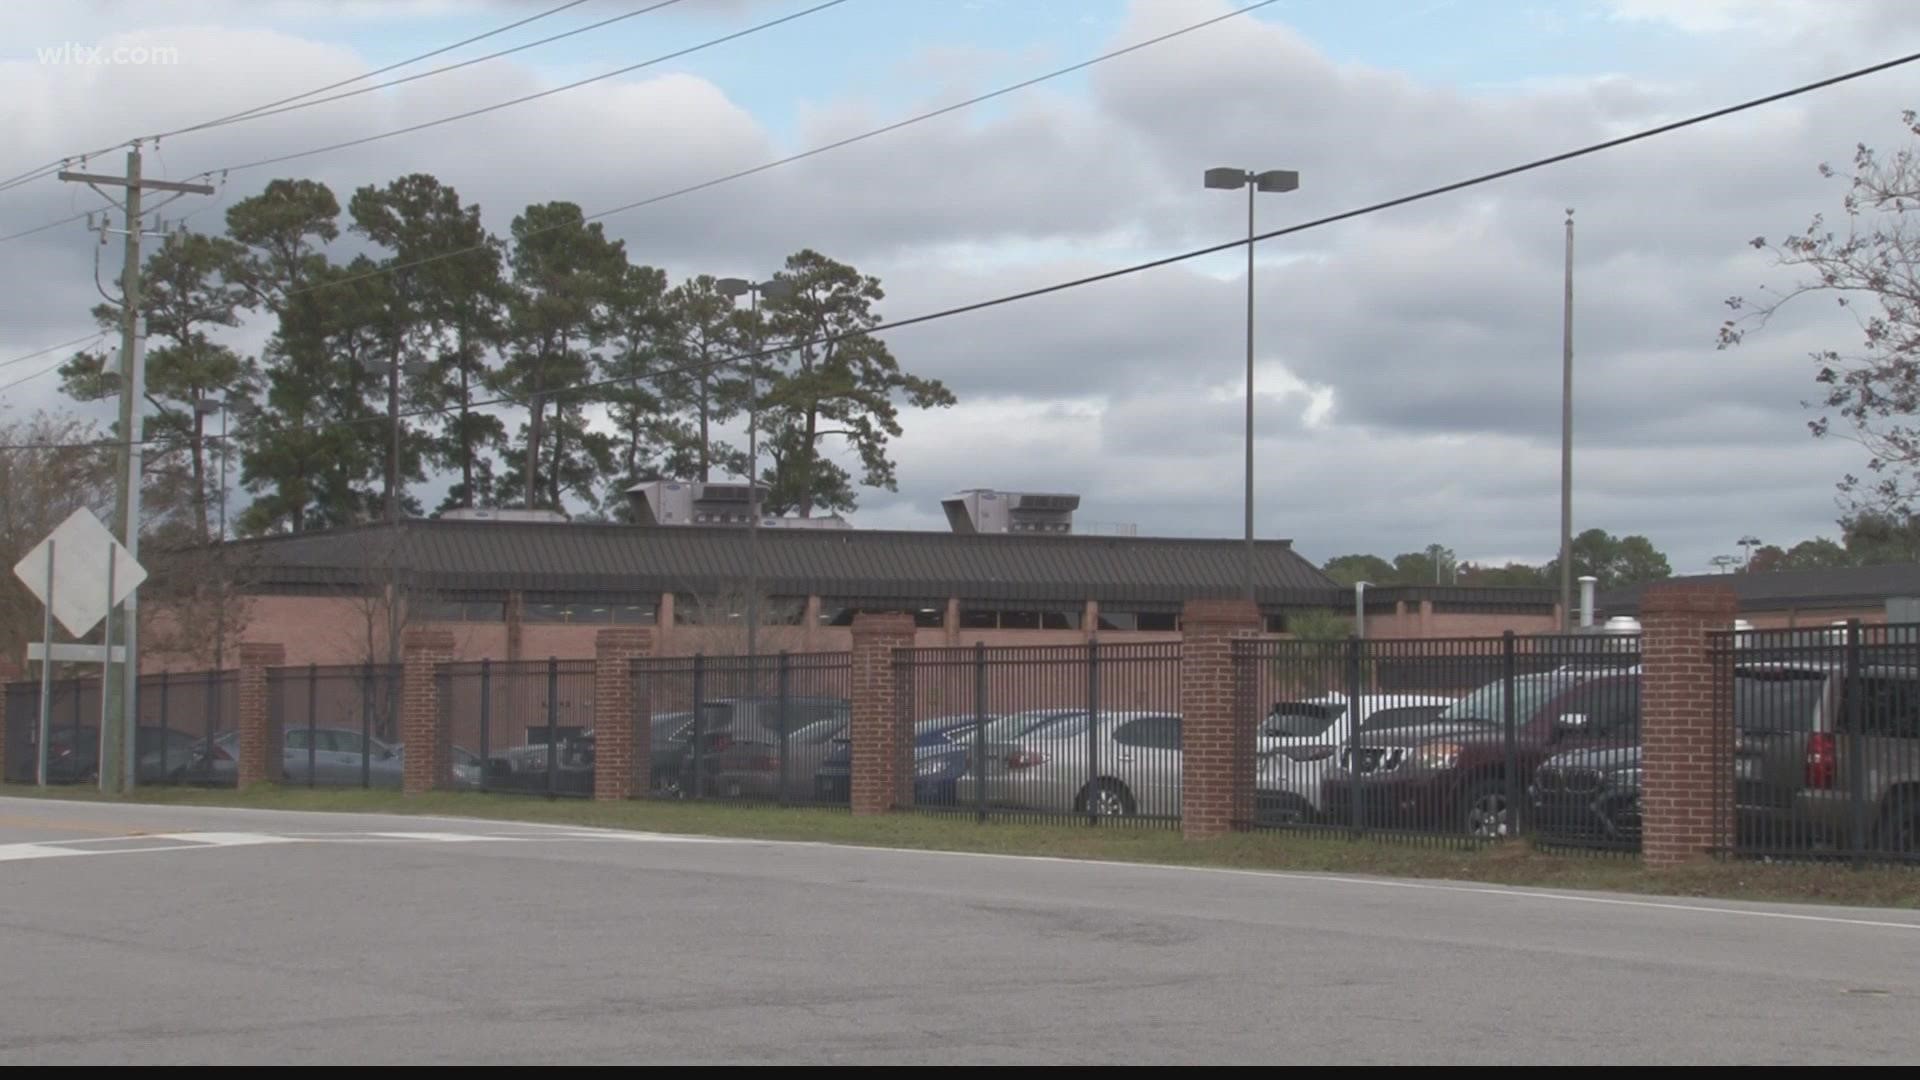 The incident happened at Lower Richland High School.  A campus monitor was asked to get a student to leave class.